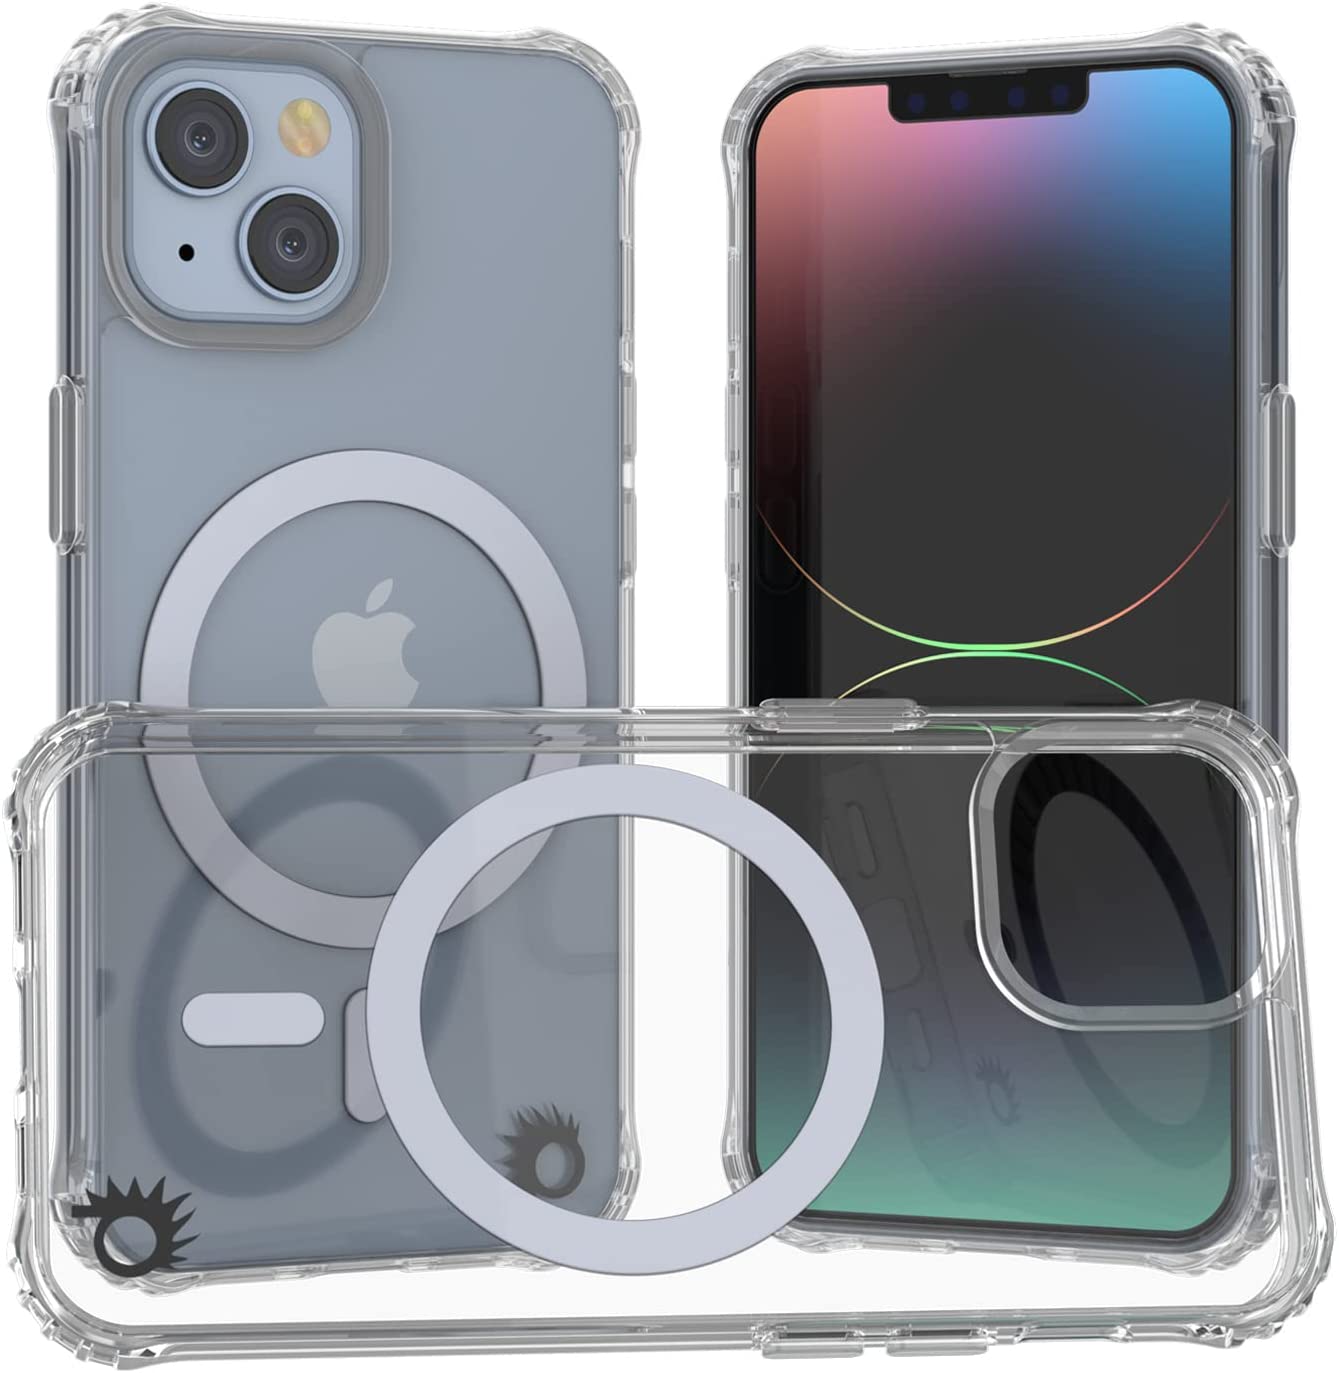 Punkcase iPhone 14 Magnetic Wireless Charging Case [ClearMag Series]